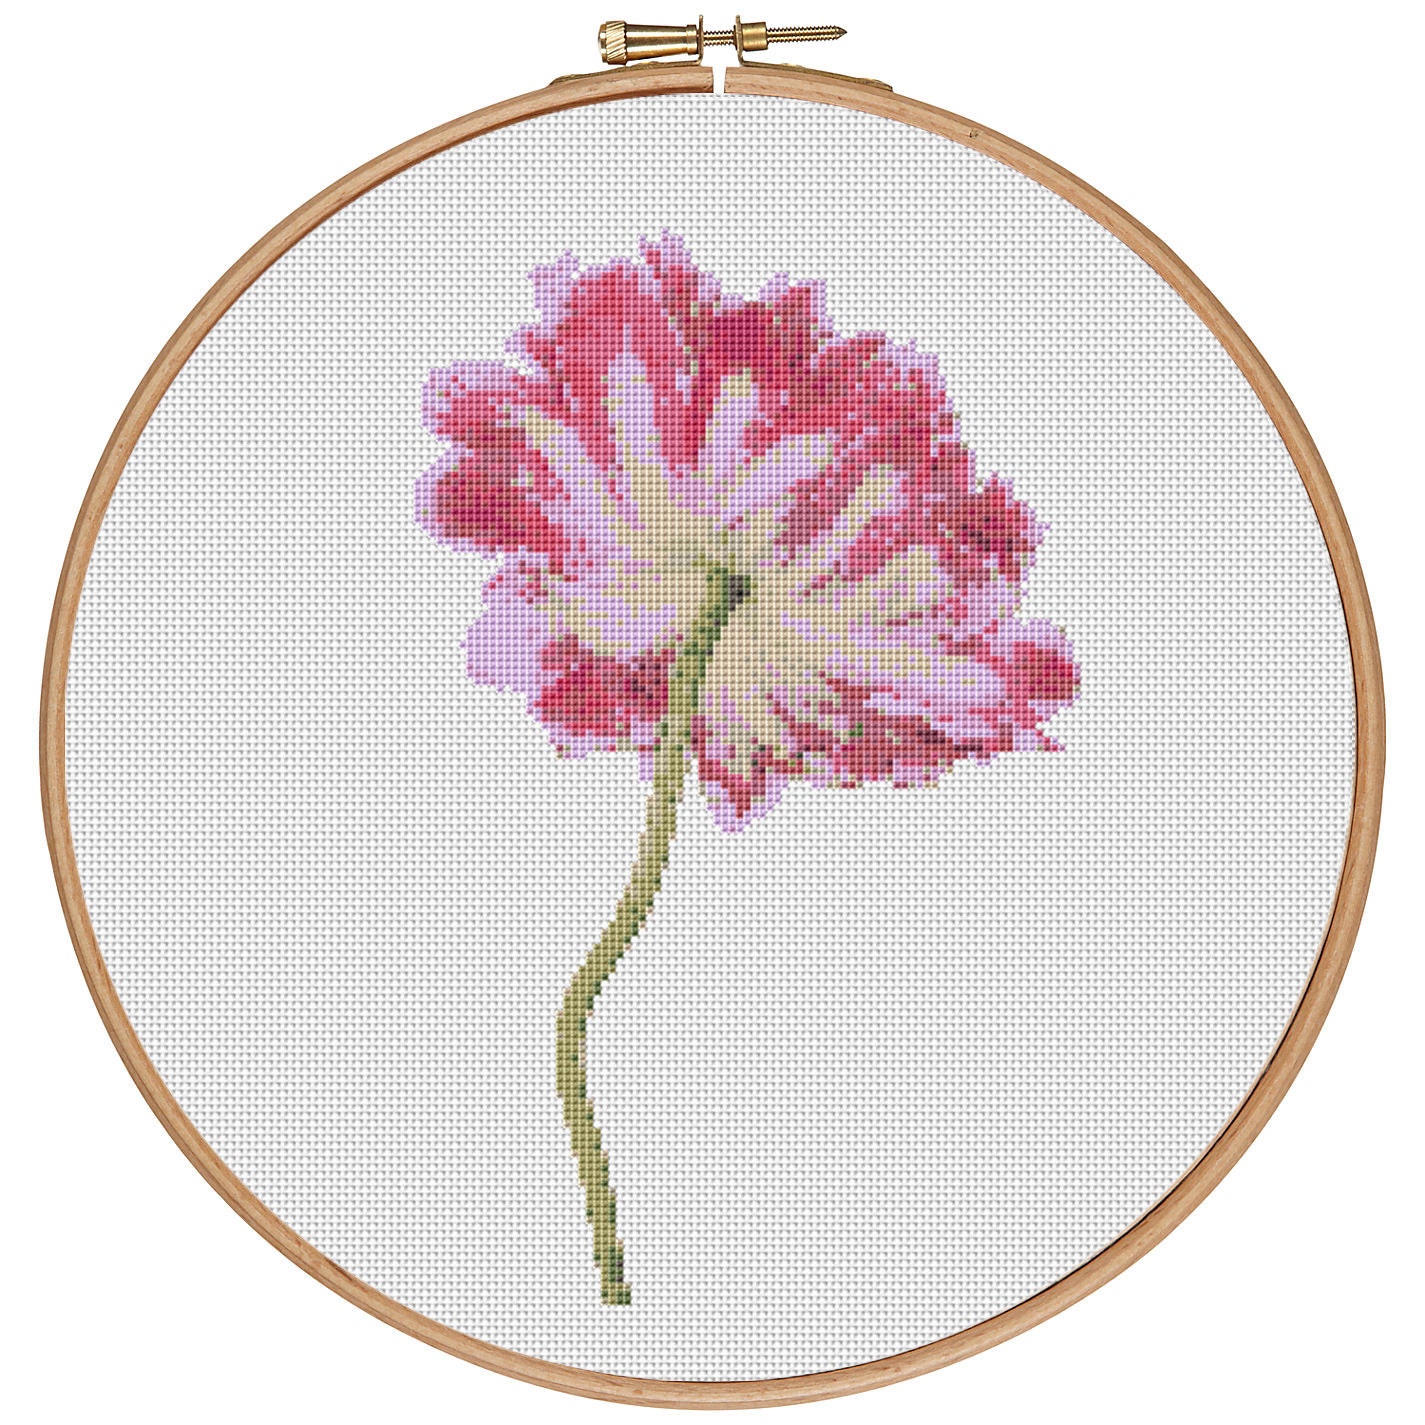 MORE for FREE - Spring Flower - Counted Cross stitch pattern PDF ...